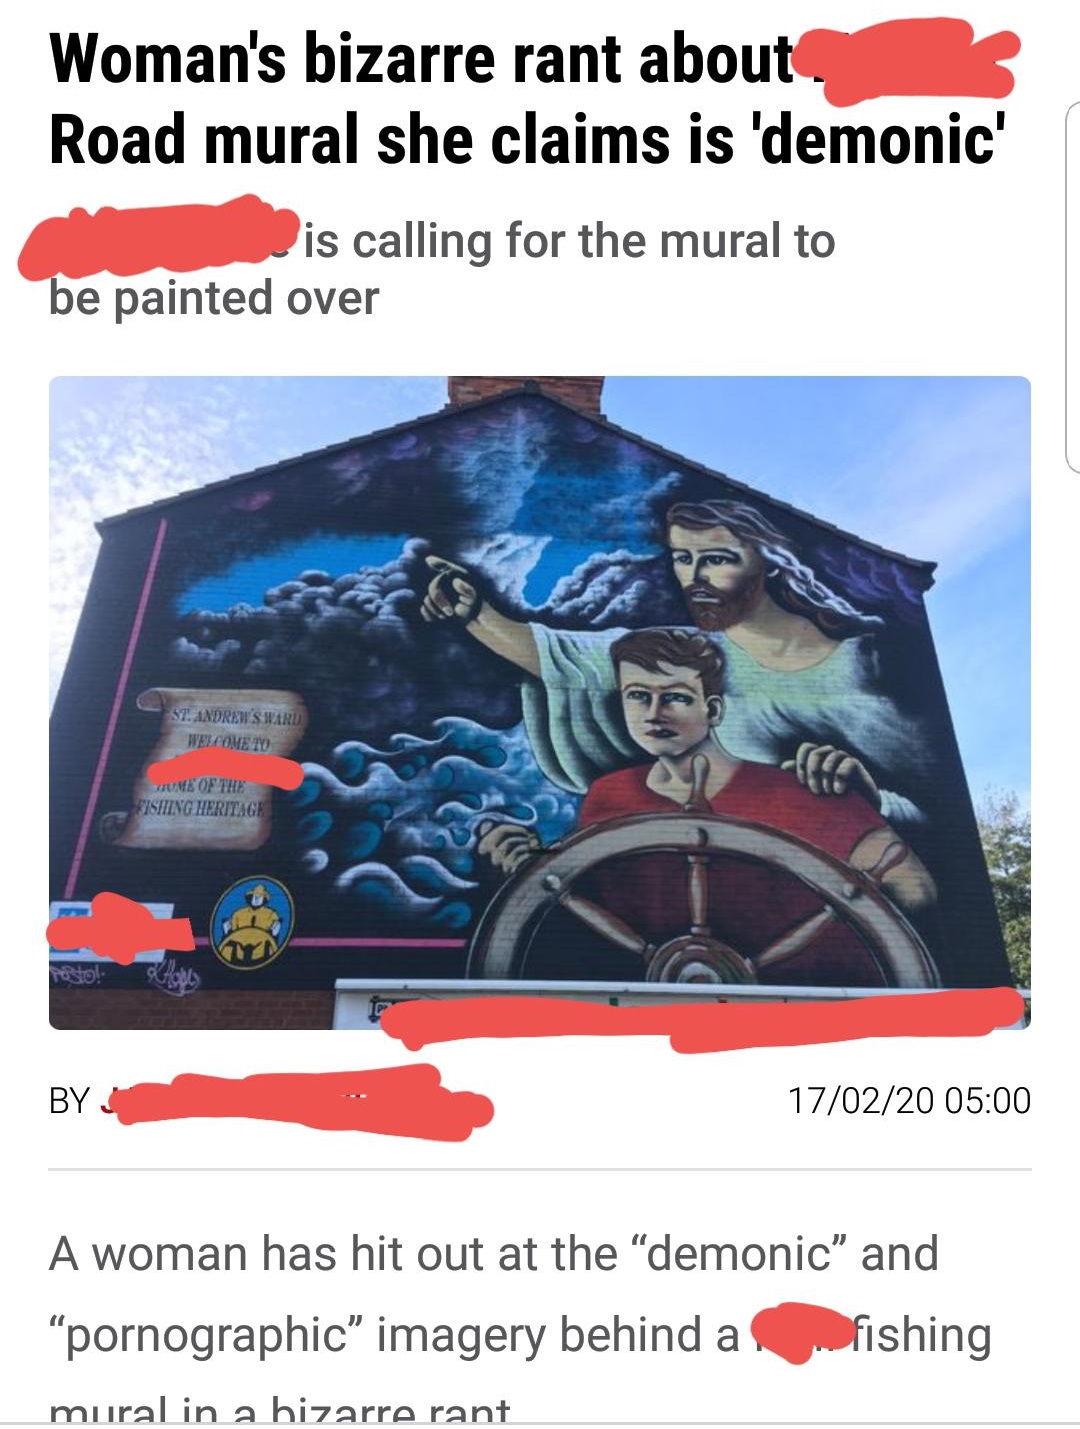 poster - Woman's bizarre rant about Road mural she claims is 'demonic' is calling for the mural to be painted over Sti Andrew'S Ward Welcomeny Me Of The Fishing Heritage Ky 170220 A woman has hit out at the demonic" and pornographic" imagery behind a fish